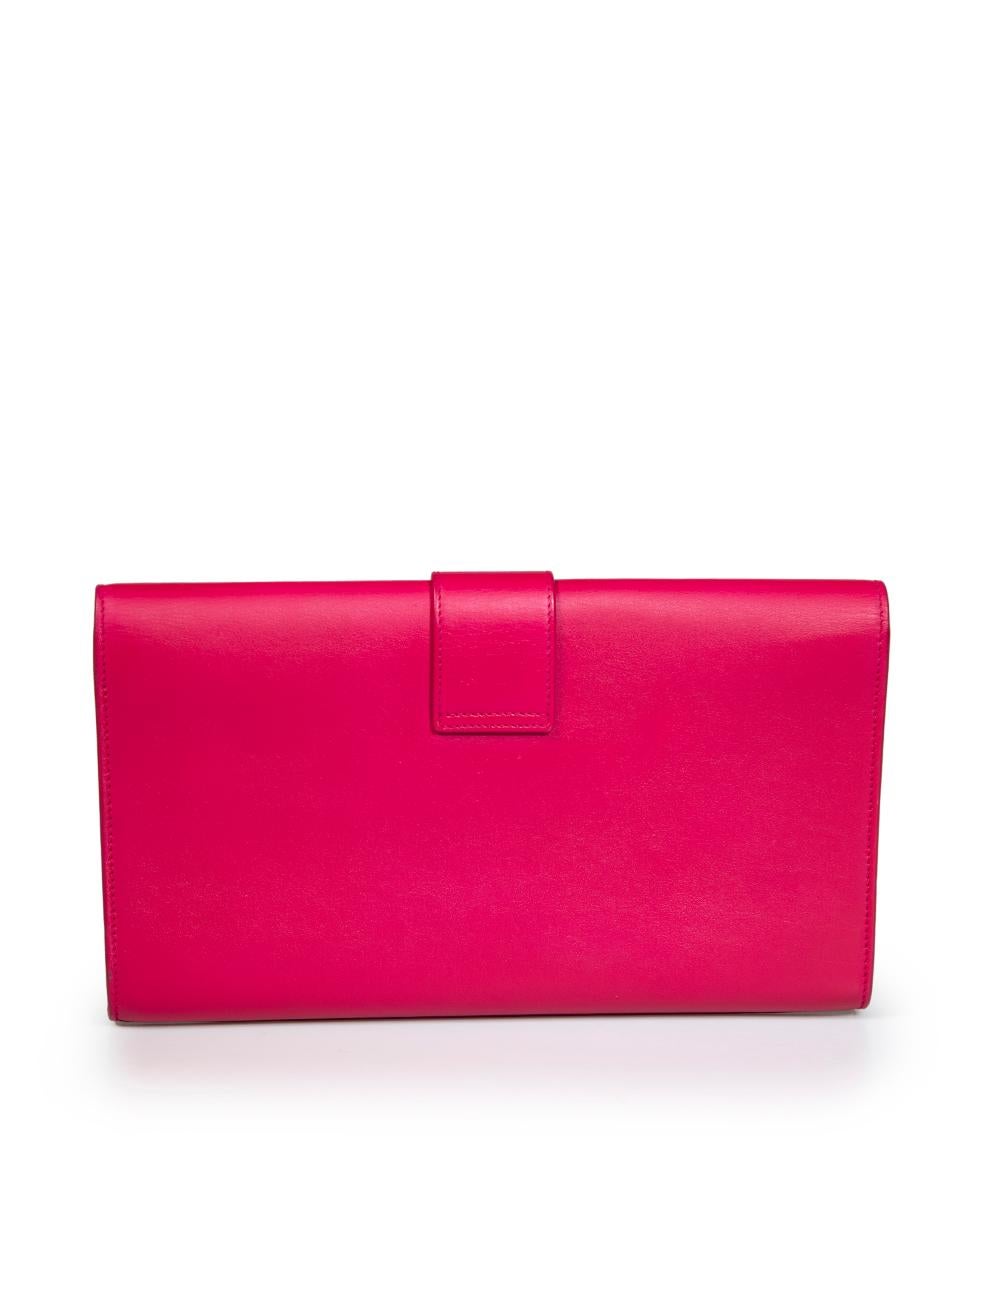 Saint Laurent Fucshia Leather Chyc Clutch In Excellent Condition For Sale In London, GB